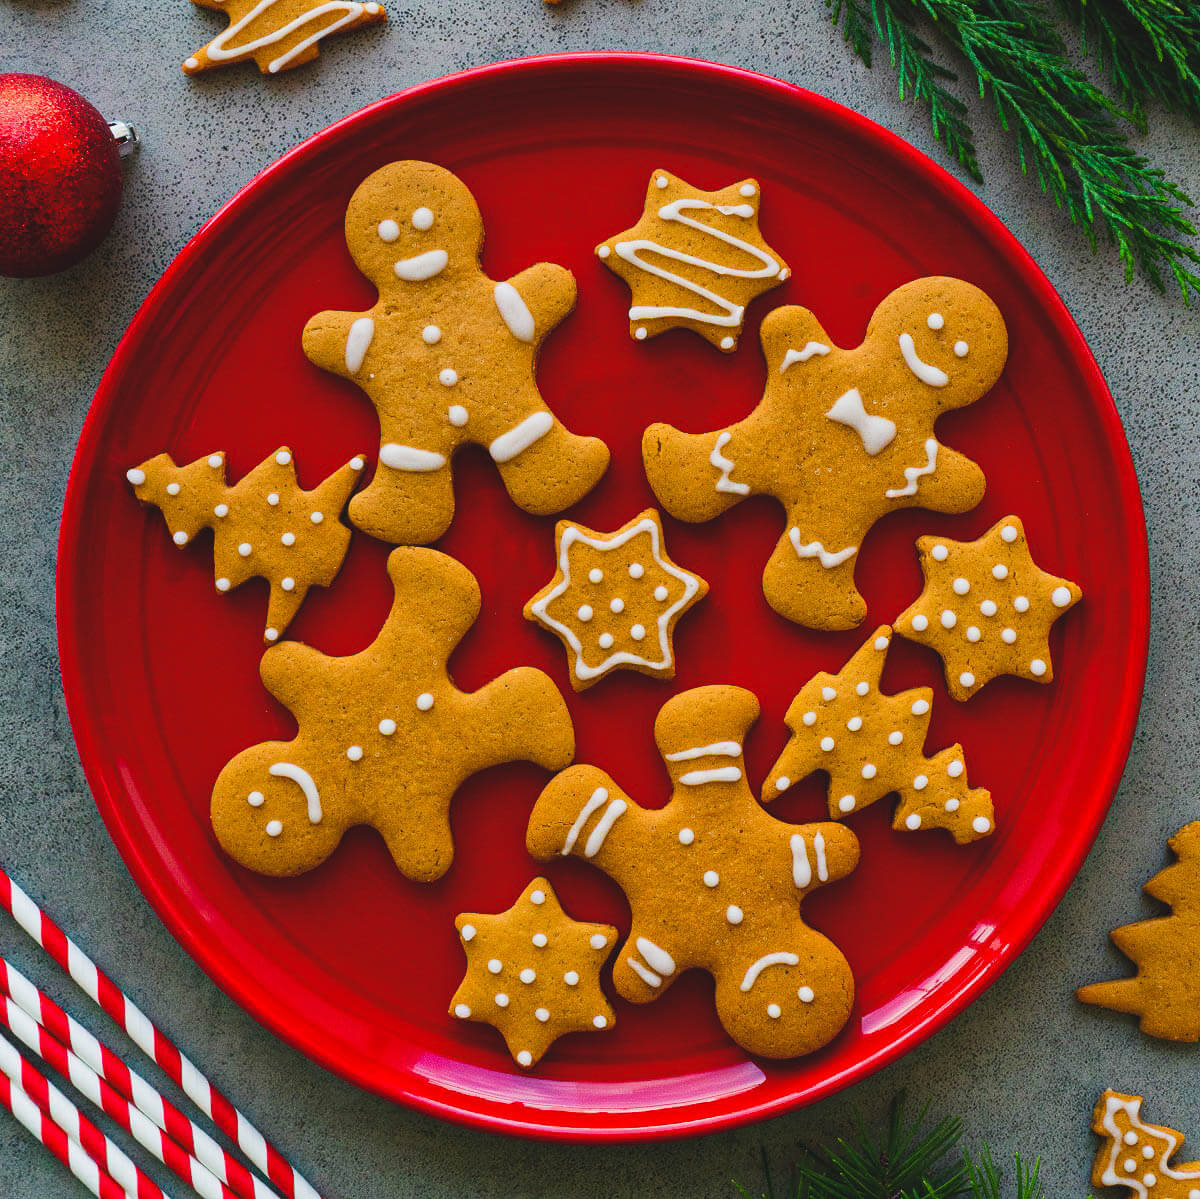 A red plate full of golden baked easy gingerbread cookies decorated with simple white piped icing embellishments.